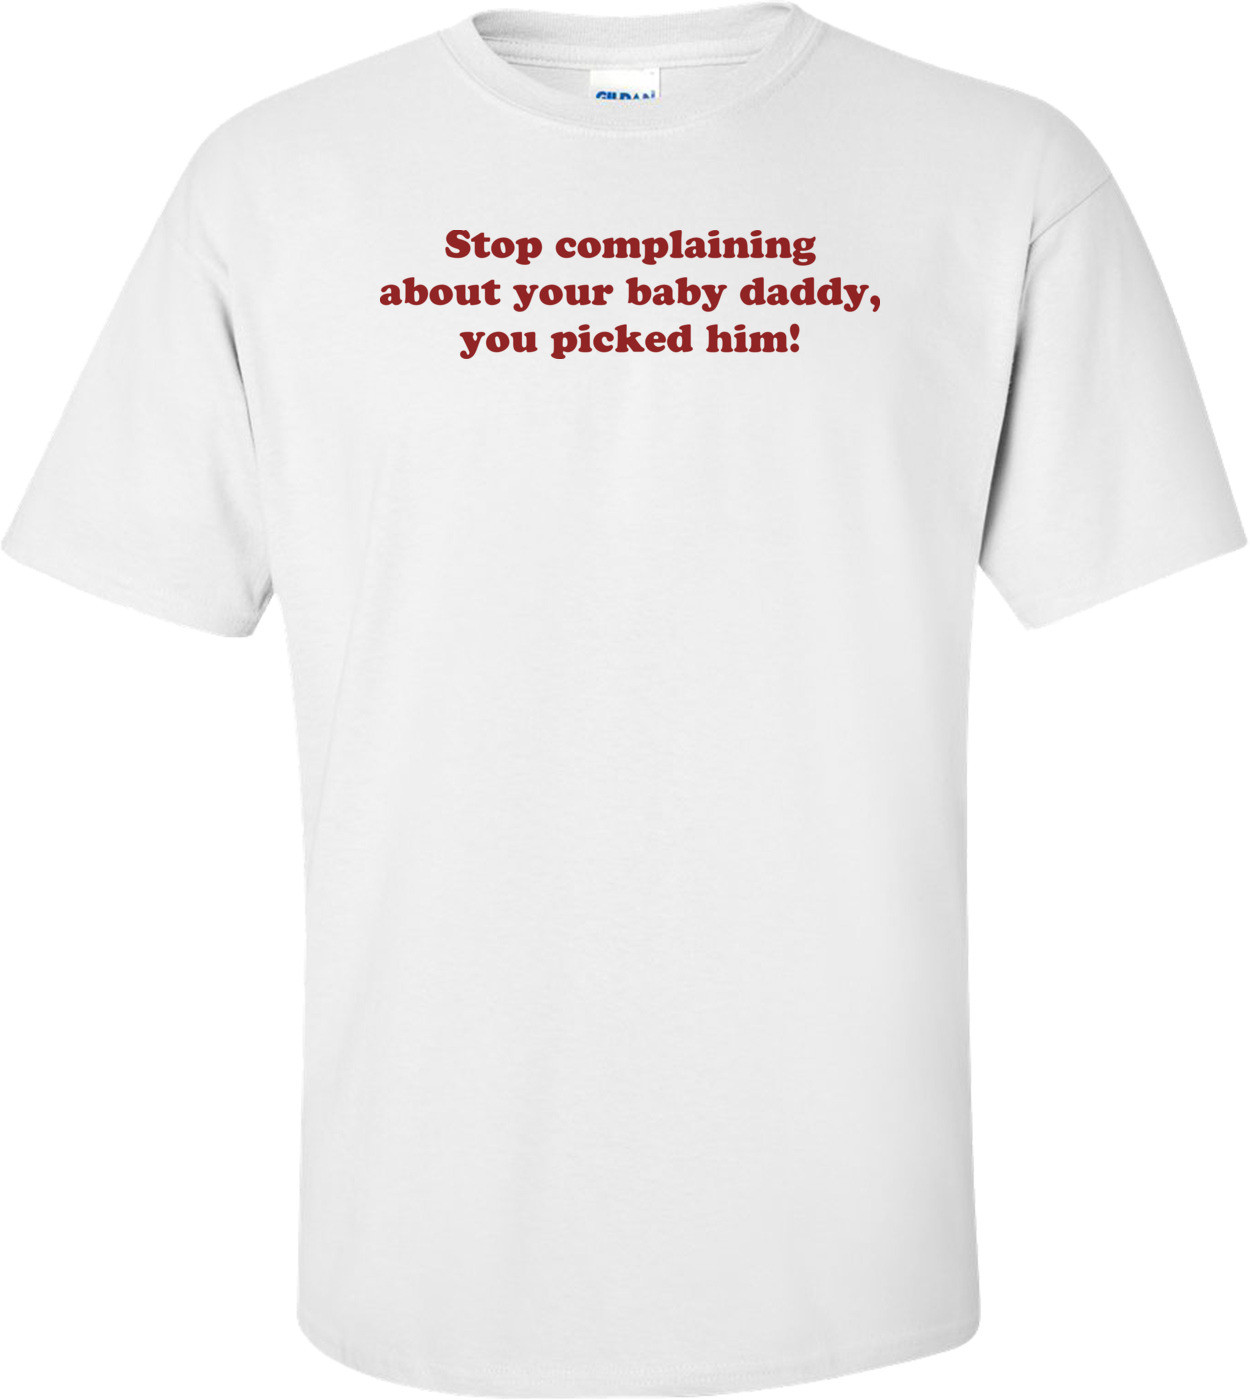 Stop Complaining About Your Baby Daddy, You Picked Him! Shirt